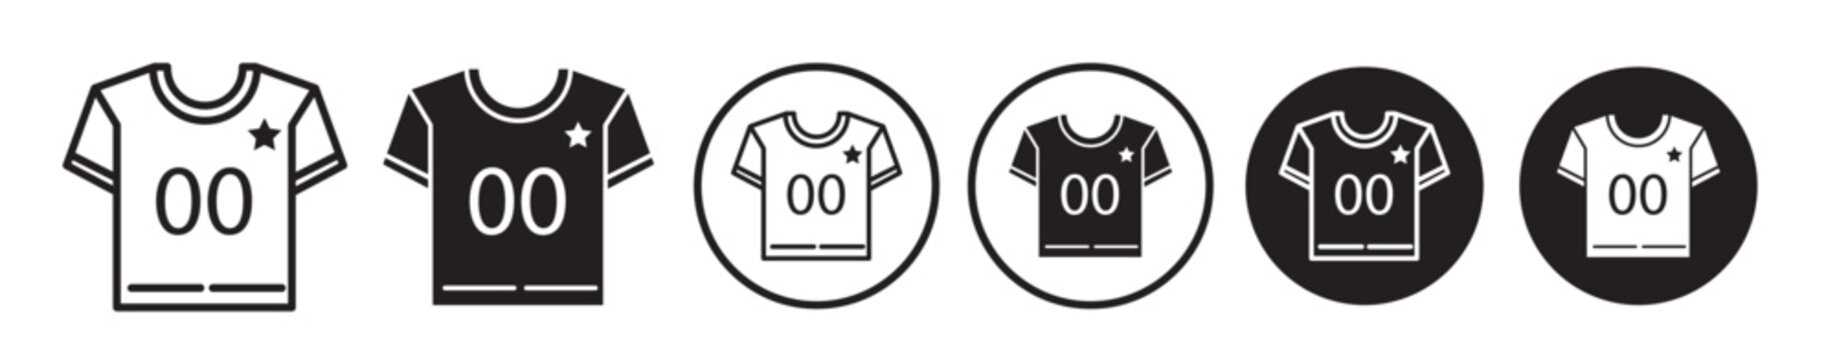 Sport Jersey icon set. soccer, football, or basketball team jersey vector symbol in filled and line style.